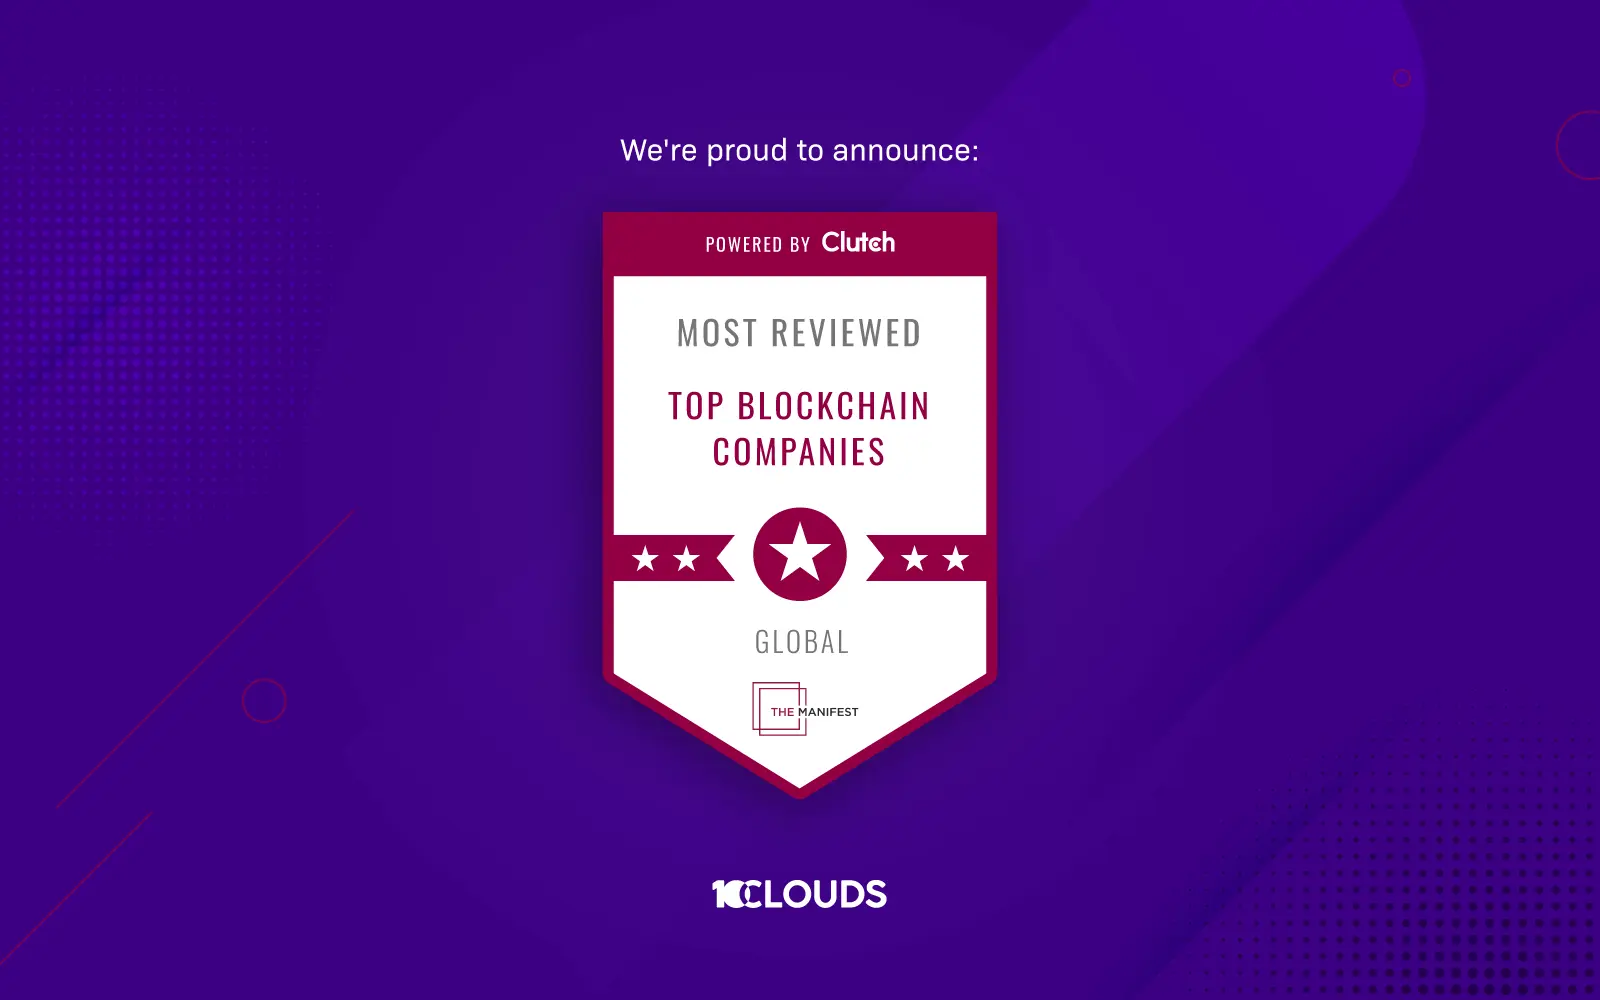 Award for most reviewed Global blockchain company